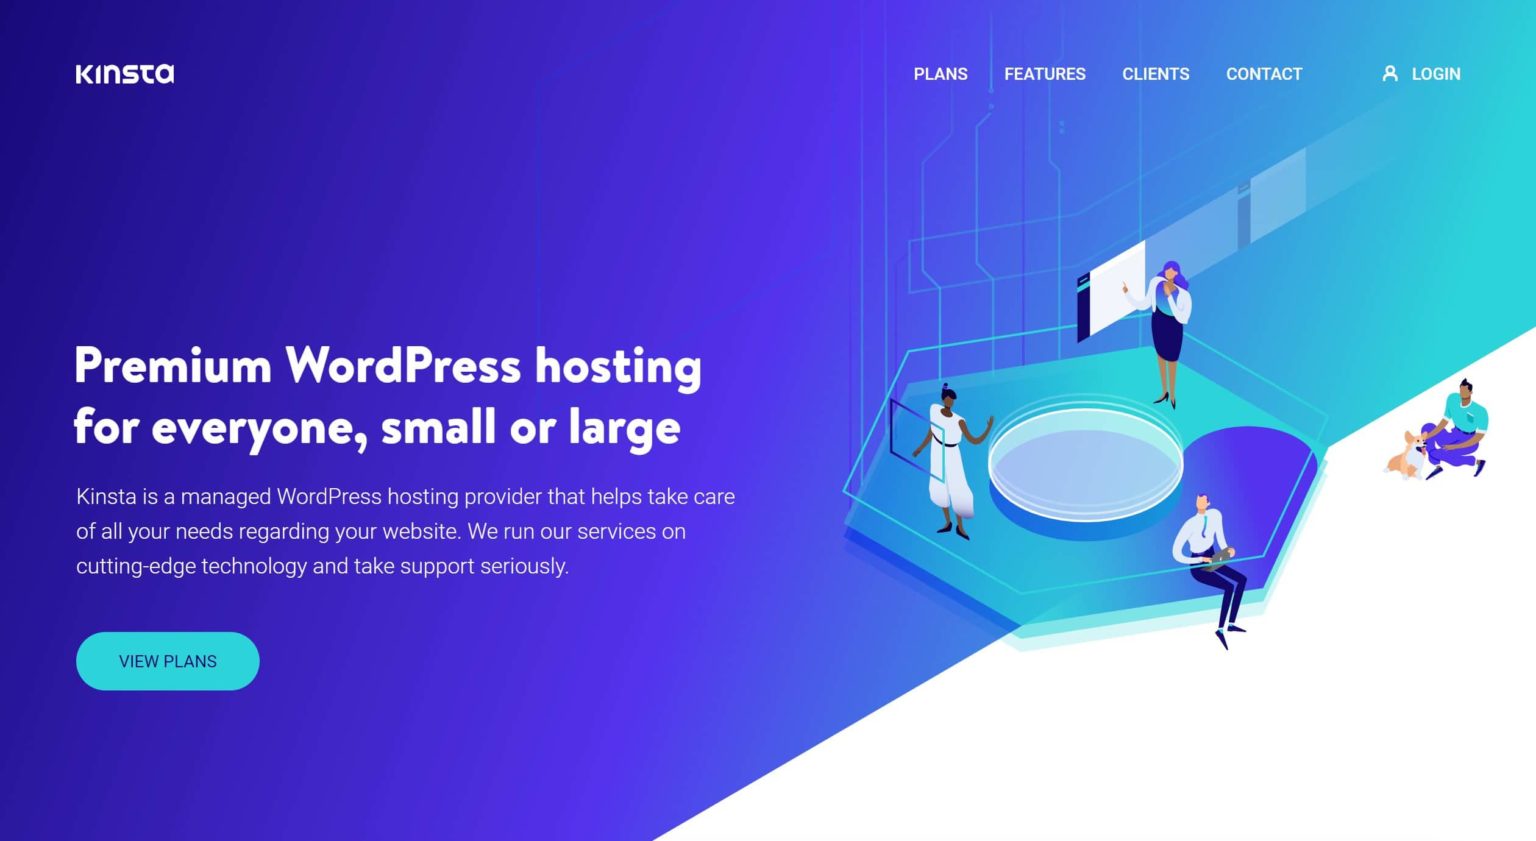 kinsta is a fast managed WordPress hosting for sites